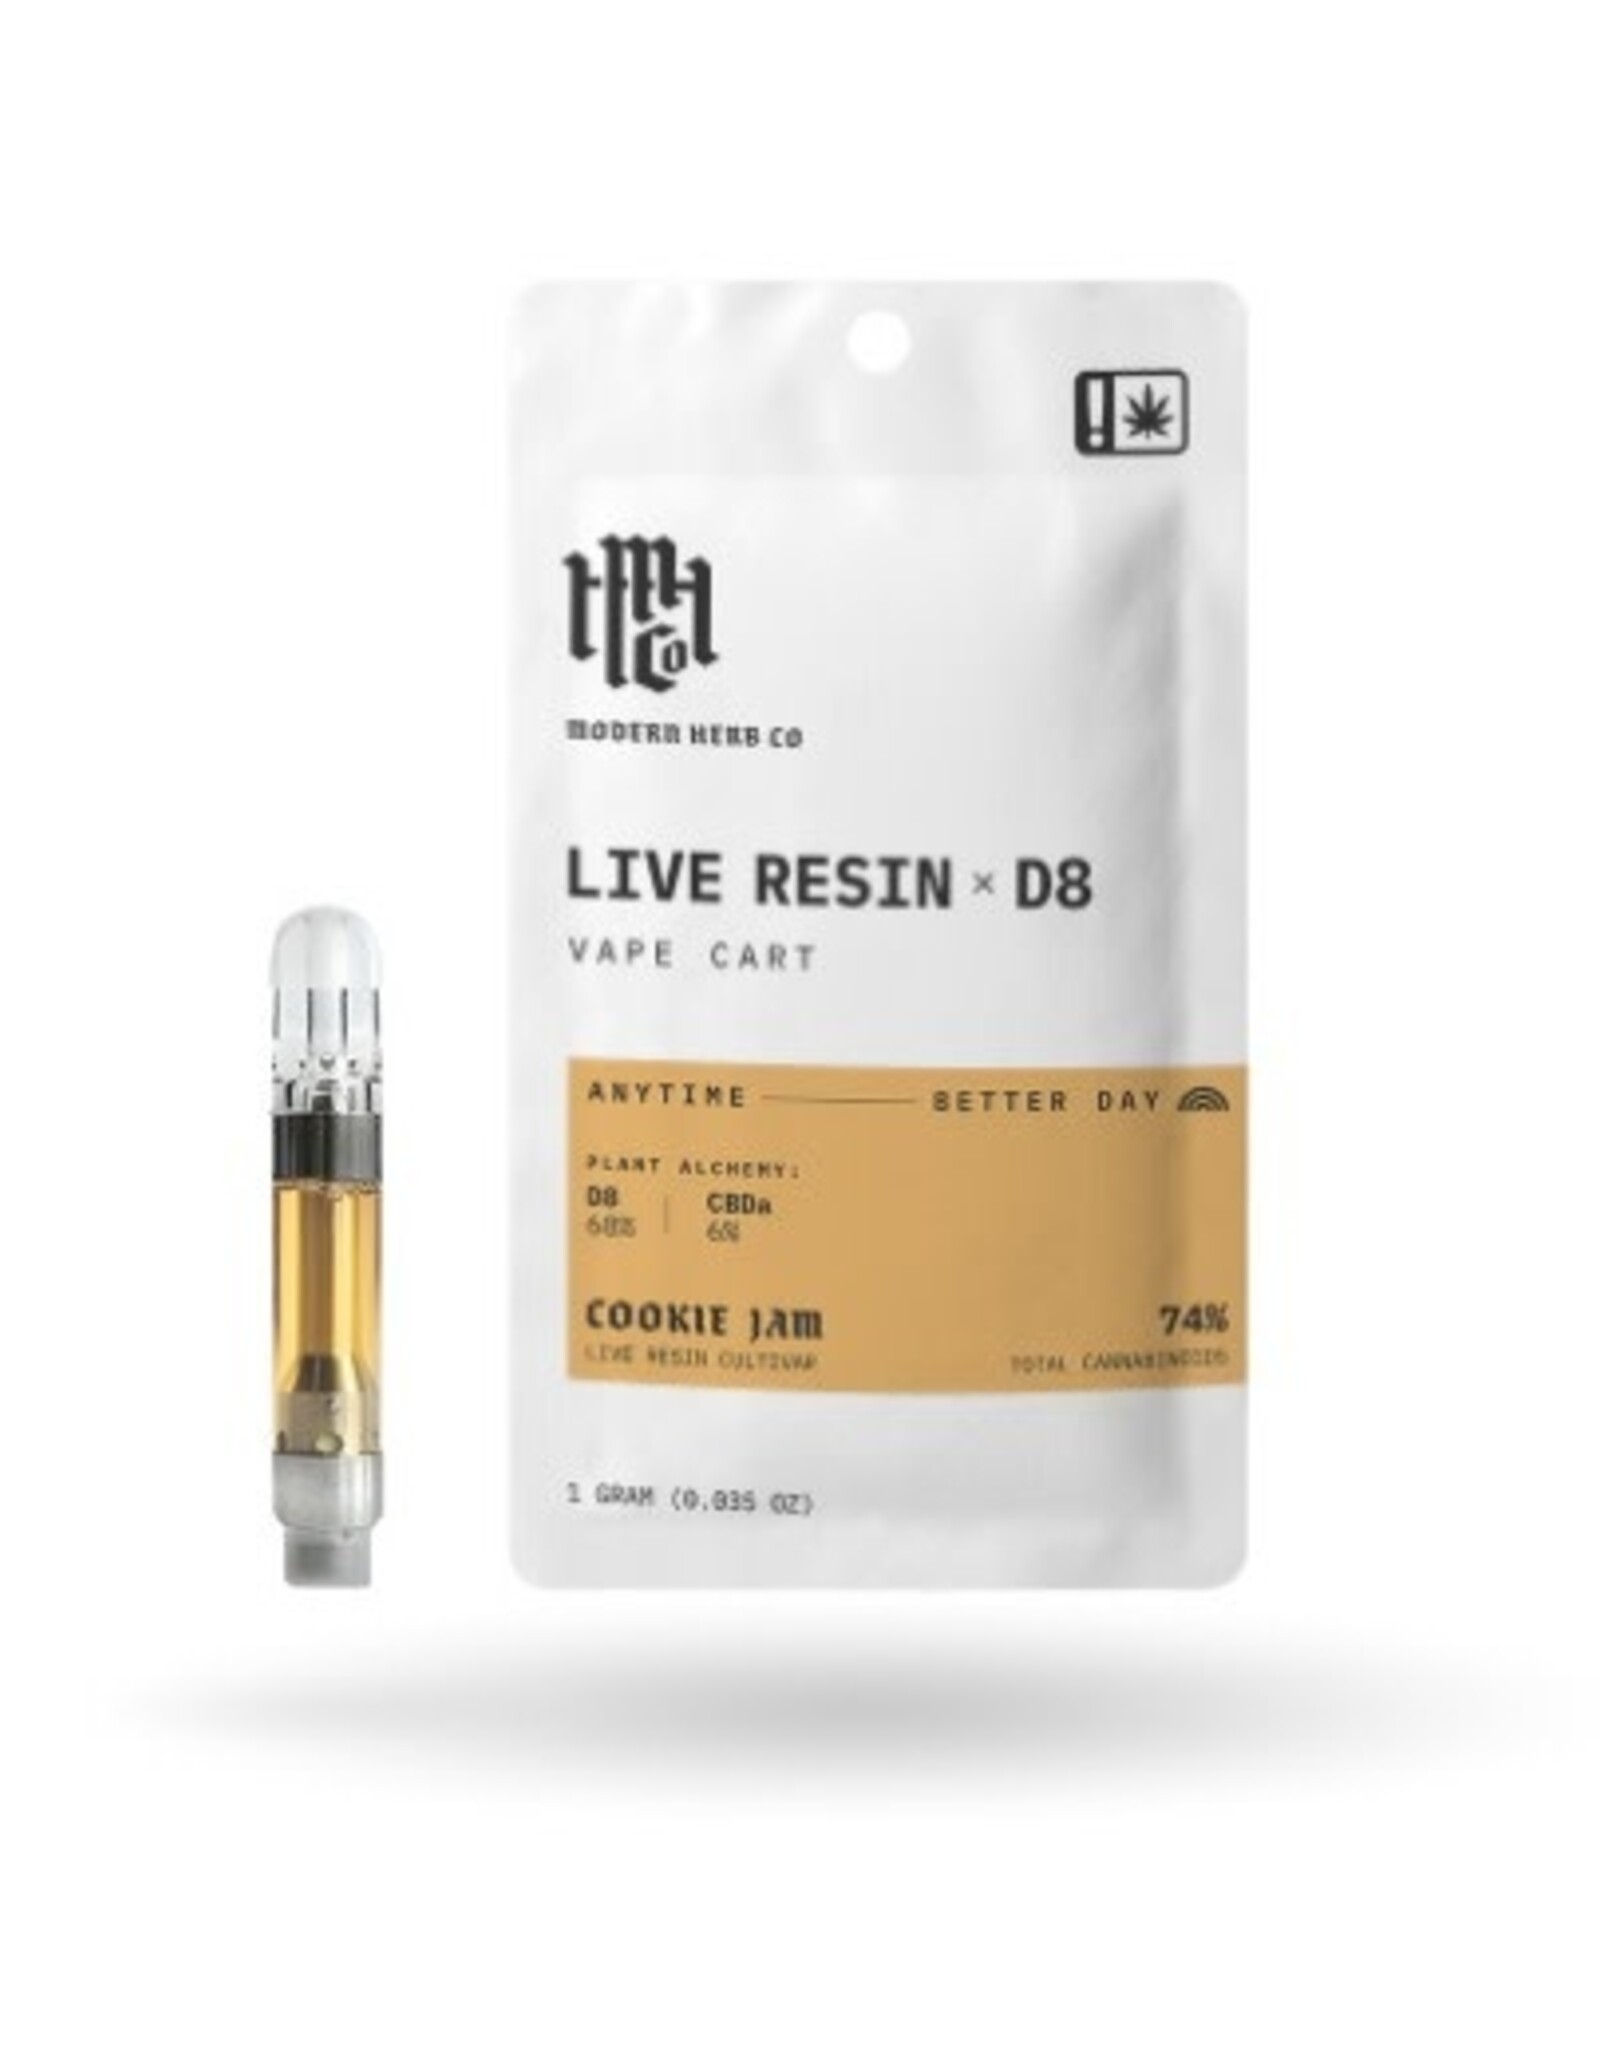 Modern Herb Co. Modern Herb Co. Live Resin Delta 8 Cart | Anytime | Cookie Jam